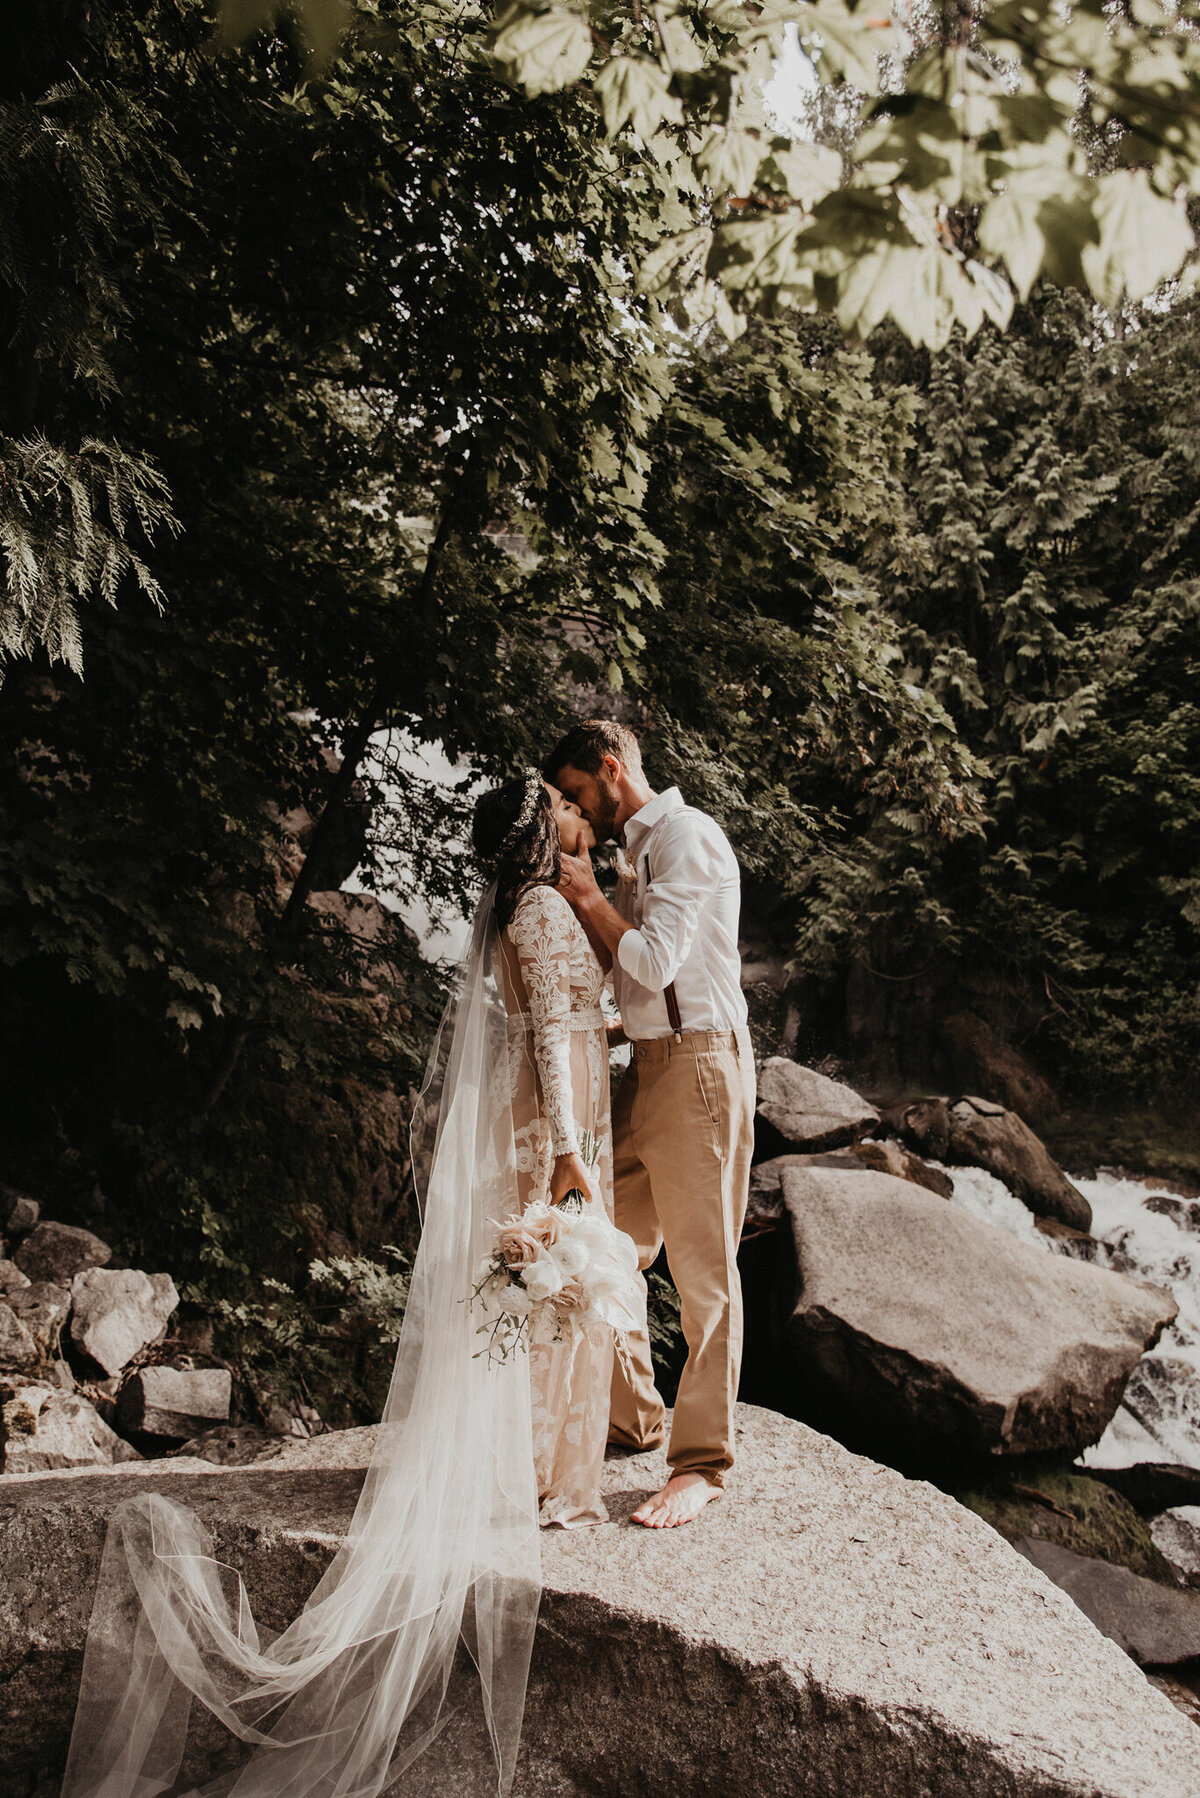 Trendy, boho inspired wedding, bride wearing ivory nude sheer lace gown, groom wearing classic white shirt, tan khakis, and leather suspenders, captured by Kelsey Vera Photography, intimate and romantic wedding photographer in Airdrie, Alberta. Featured on the Bronte Bride Vendor Guide.